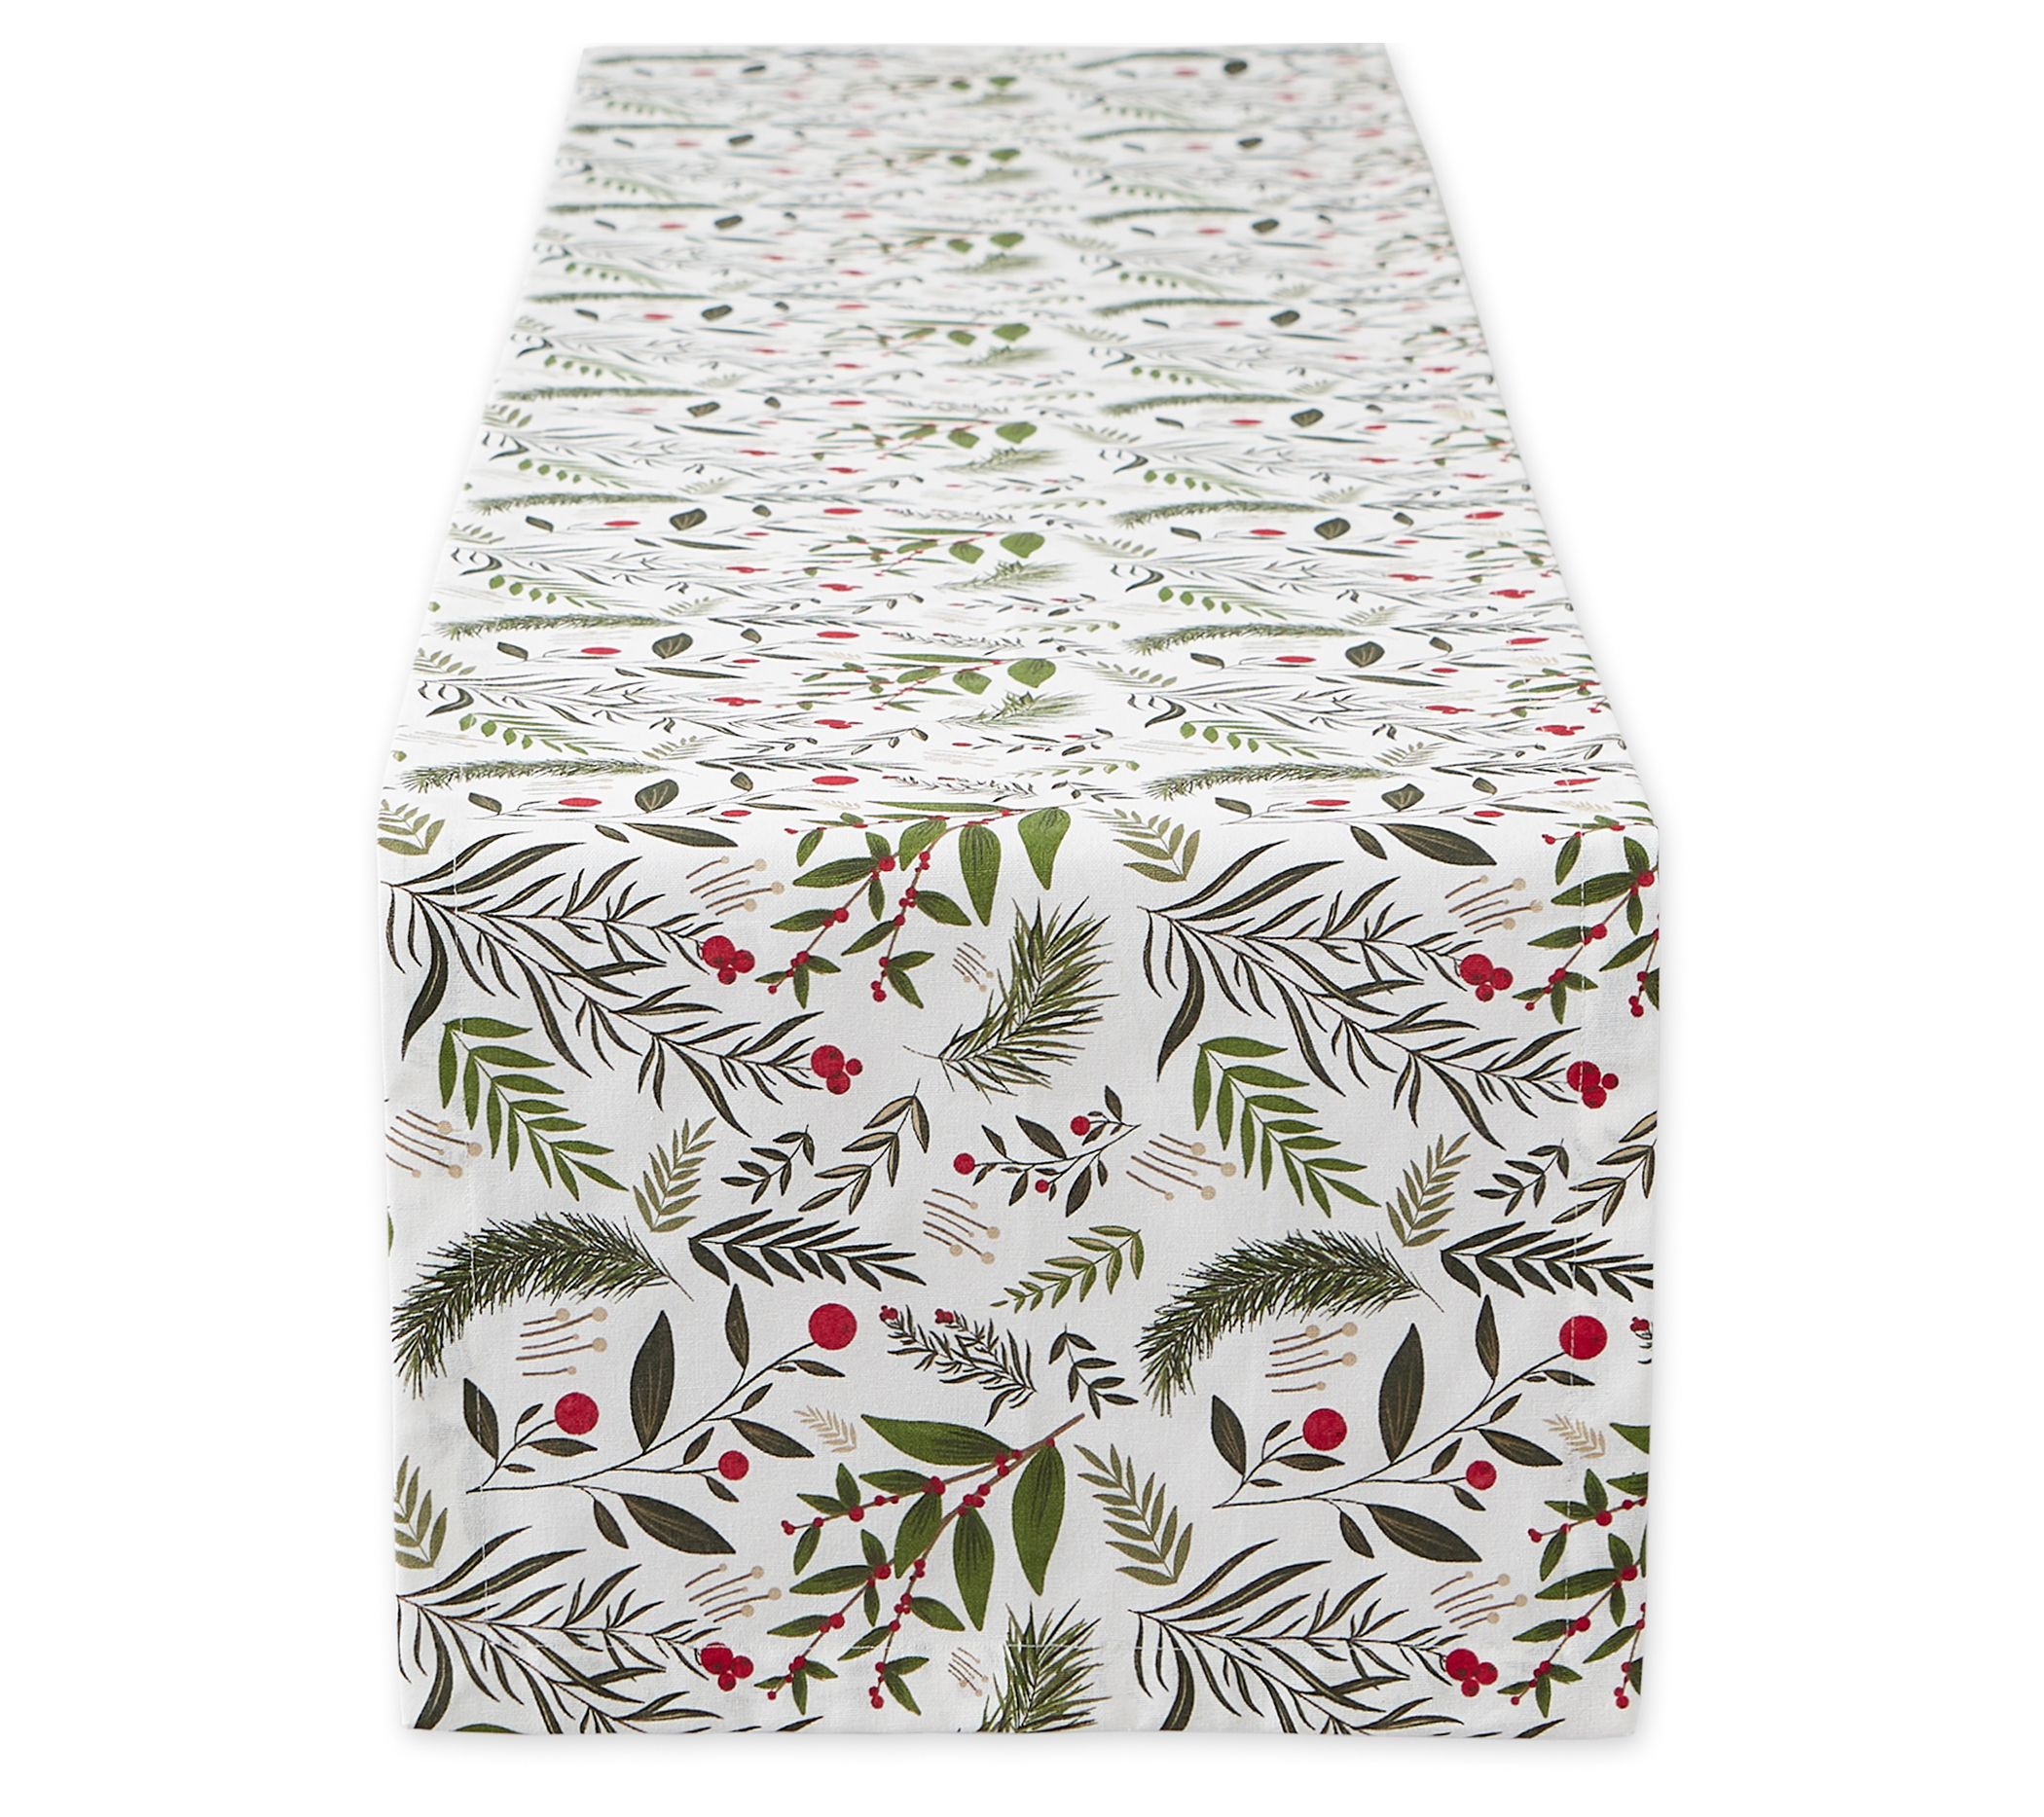 Design Imports Holiday Sprigs Table Runner 14x72 - QVC.com